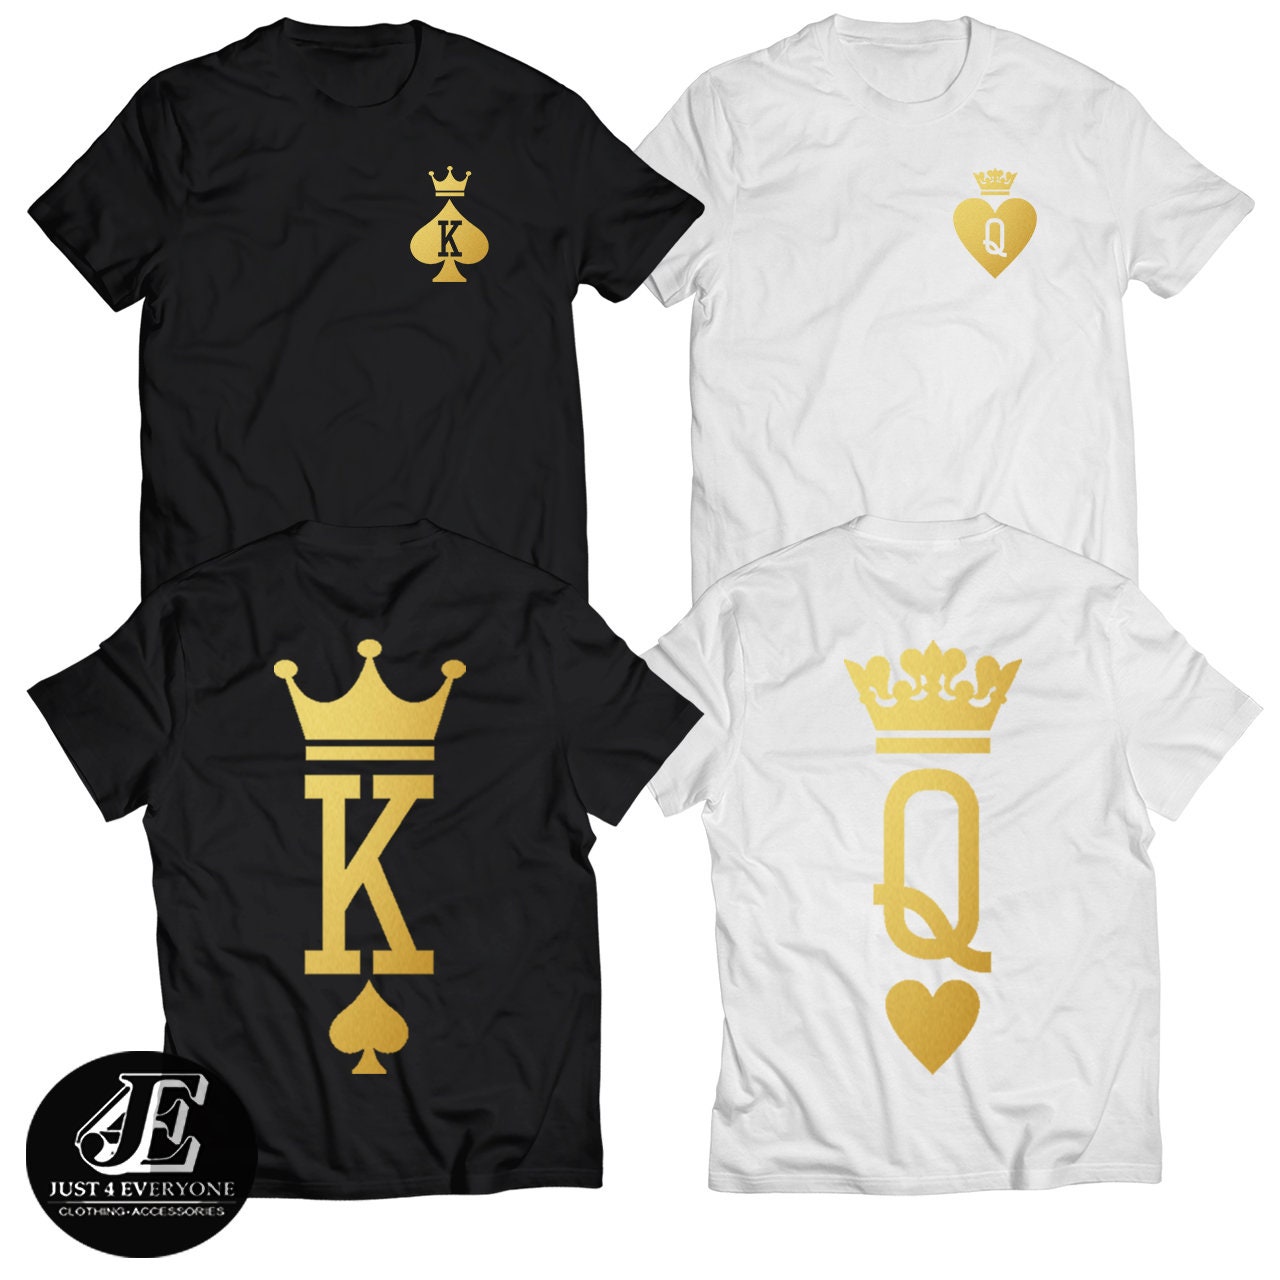 Tee shirts Couple king and queen v2 - Teewinek